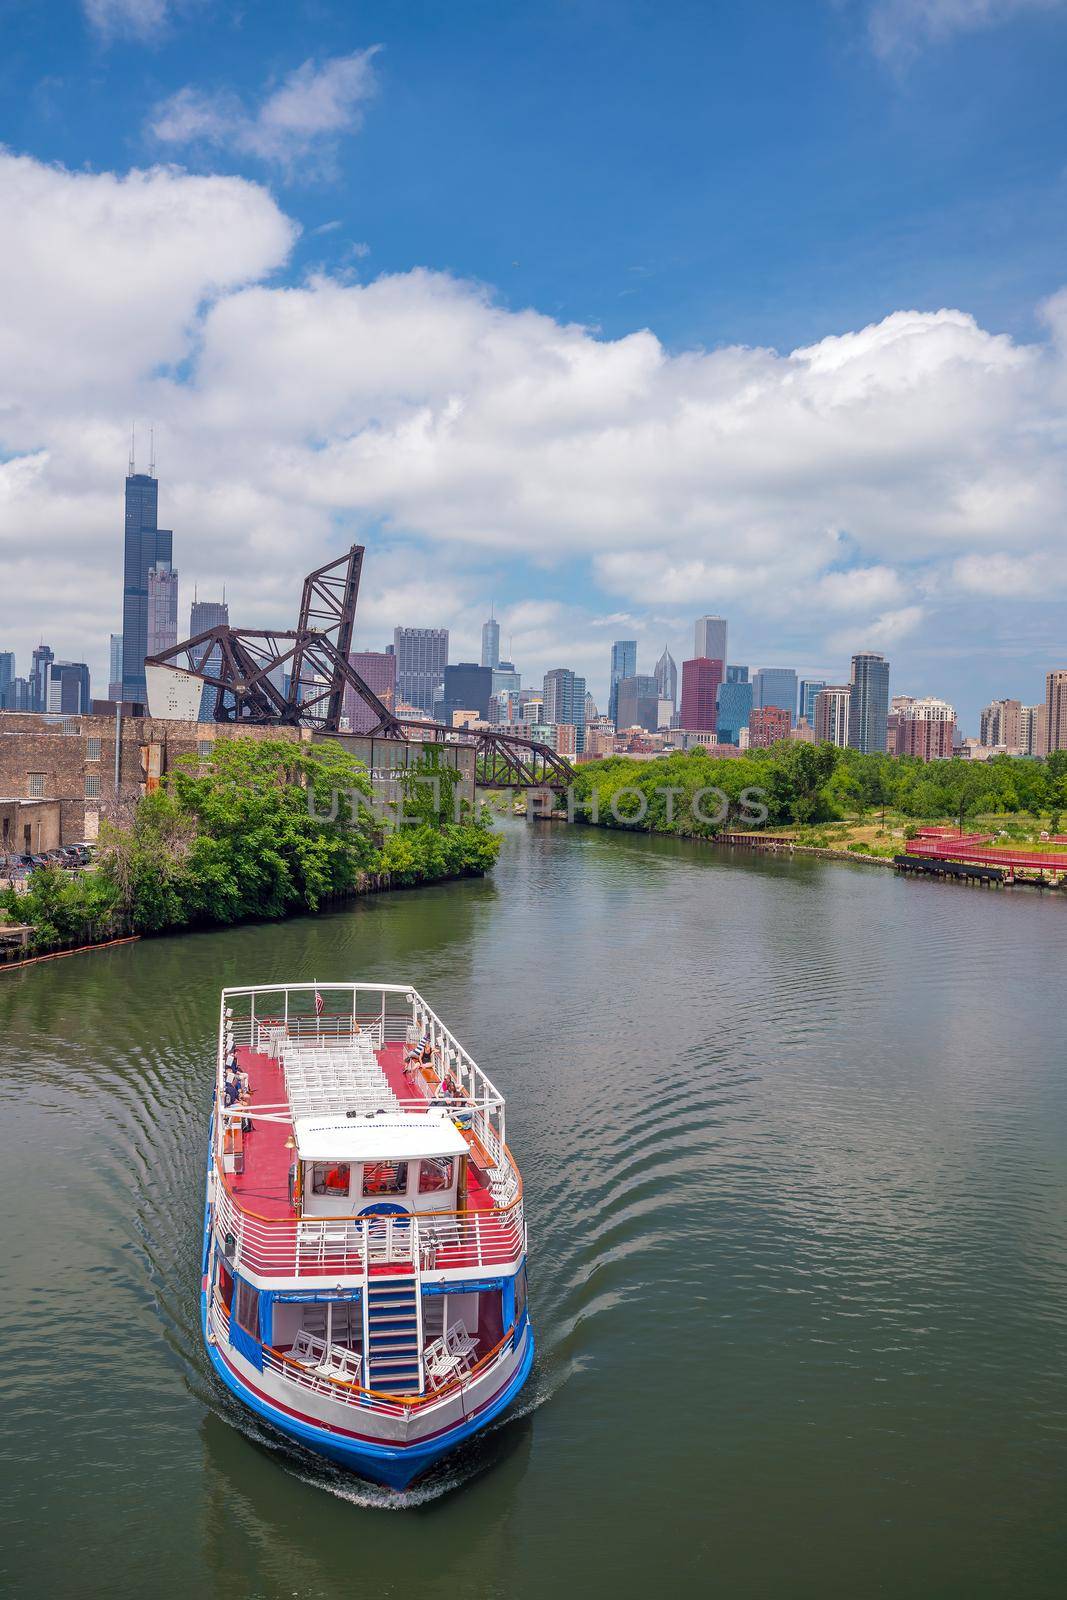 The Chicago River and downtwn Chicago skylinechicago, river, lake, michigan, urban, mississippi, great, boat, cruise, travel, business, skyline, people, architecture, tourism, landmark, avenue, building, city, blue, sky, water, bridge, illinois by f11photo